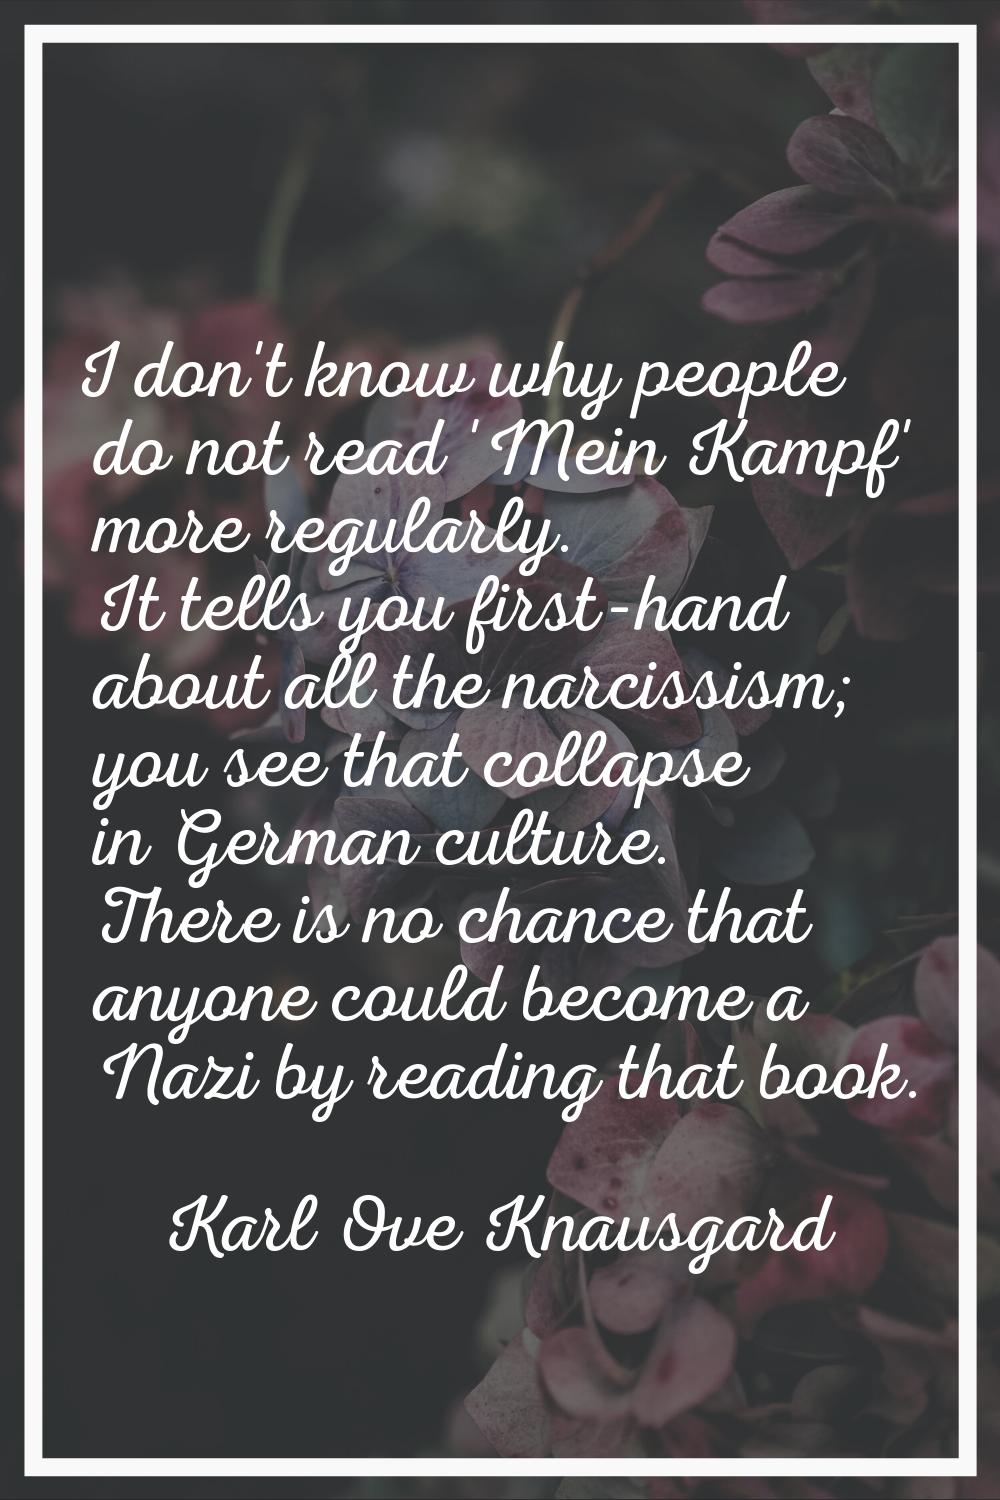 I don't know why people do not read 'Mein Kampf' more regularly. It tells you first-hand about all 